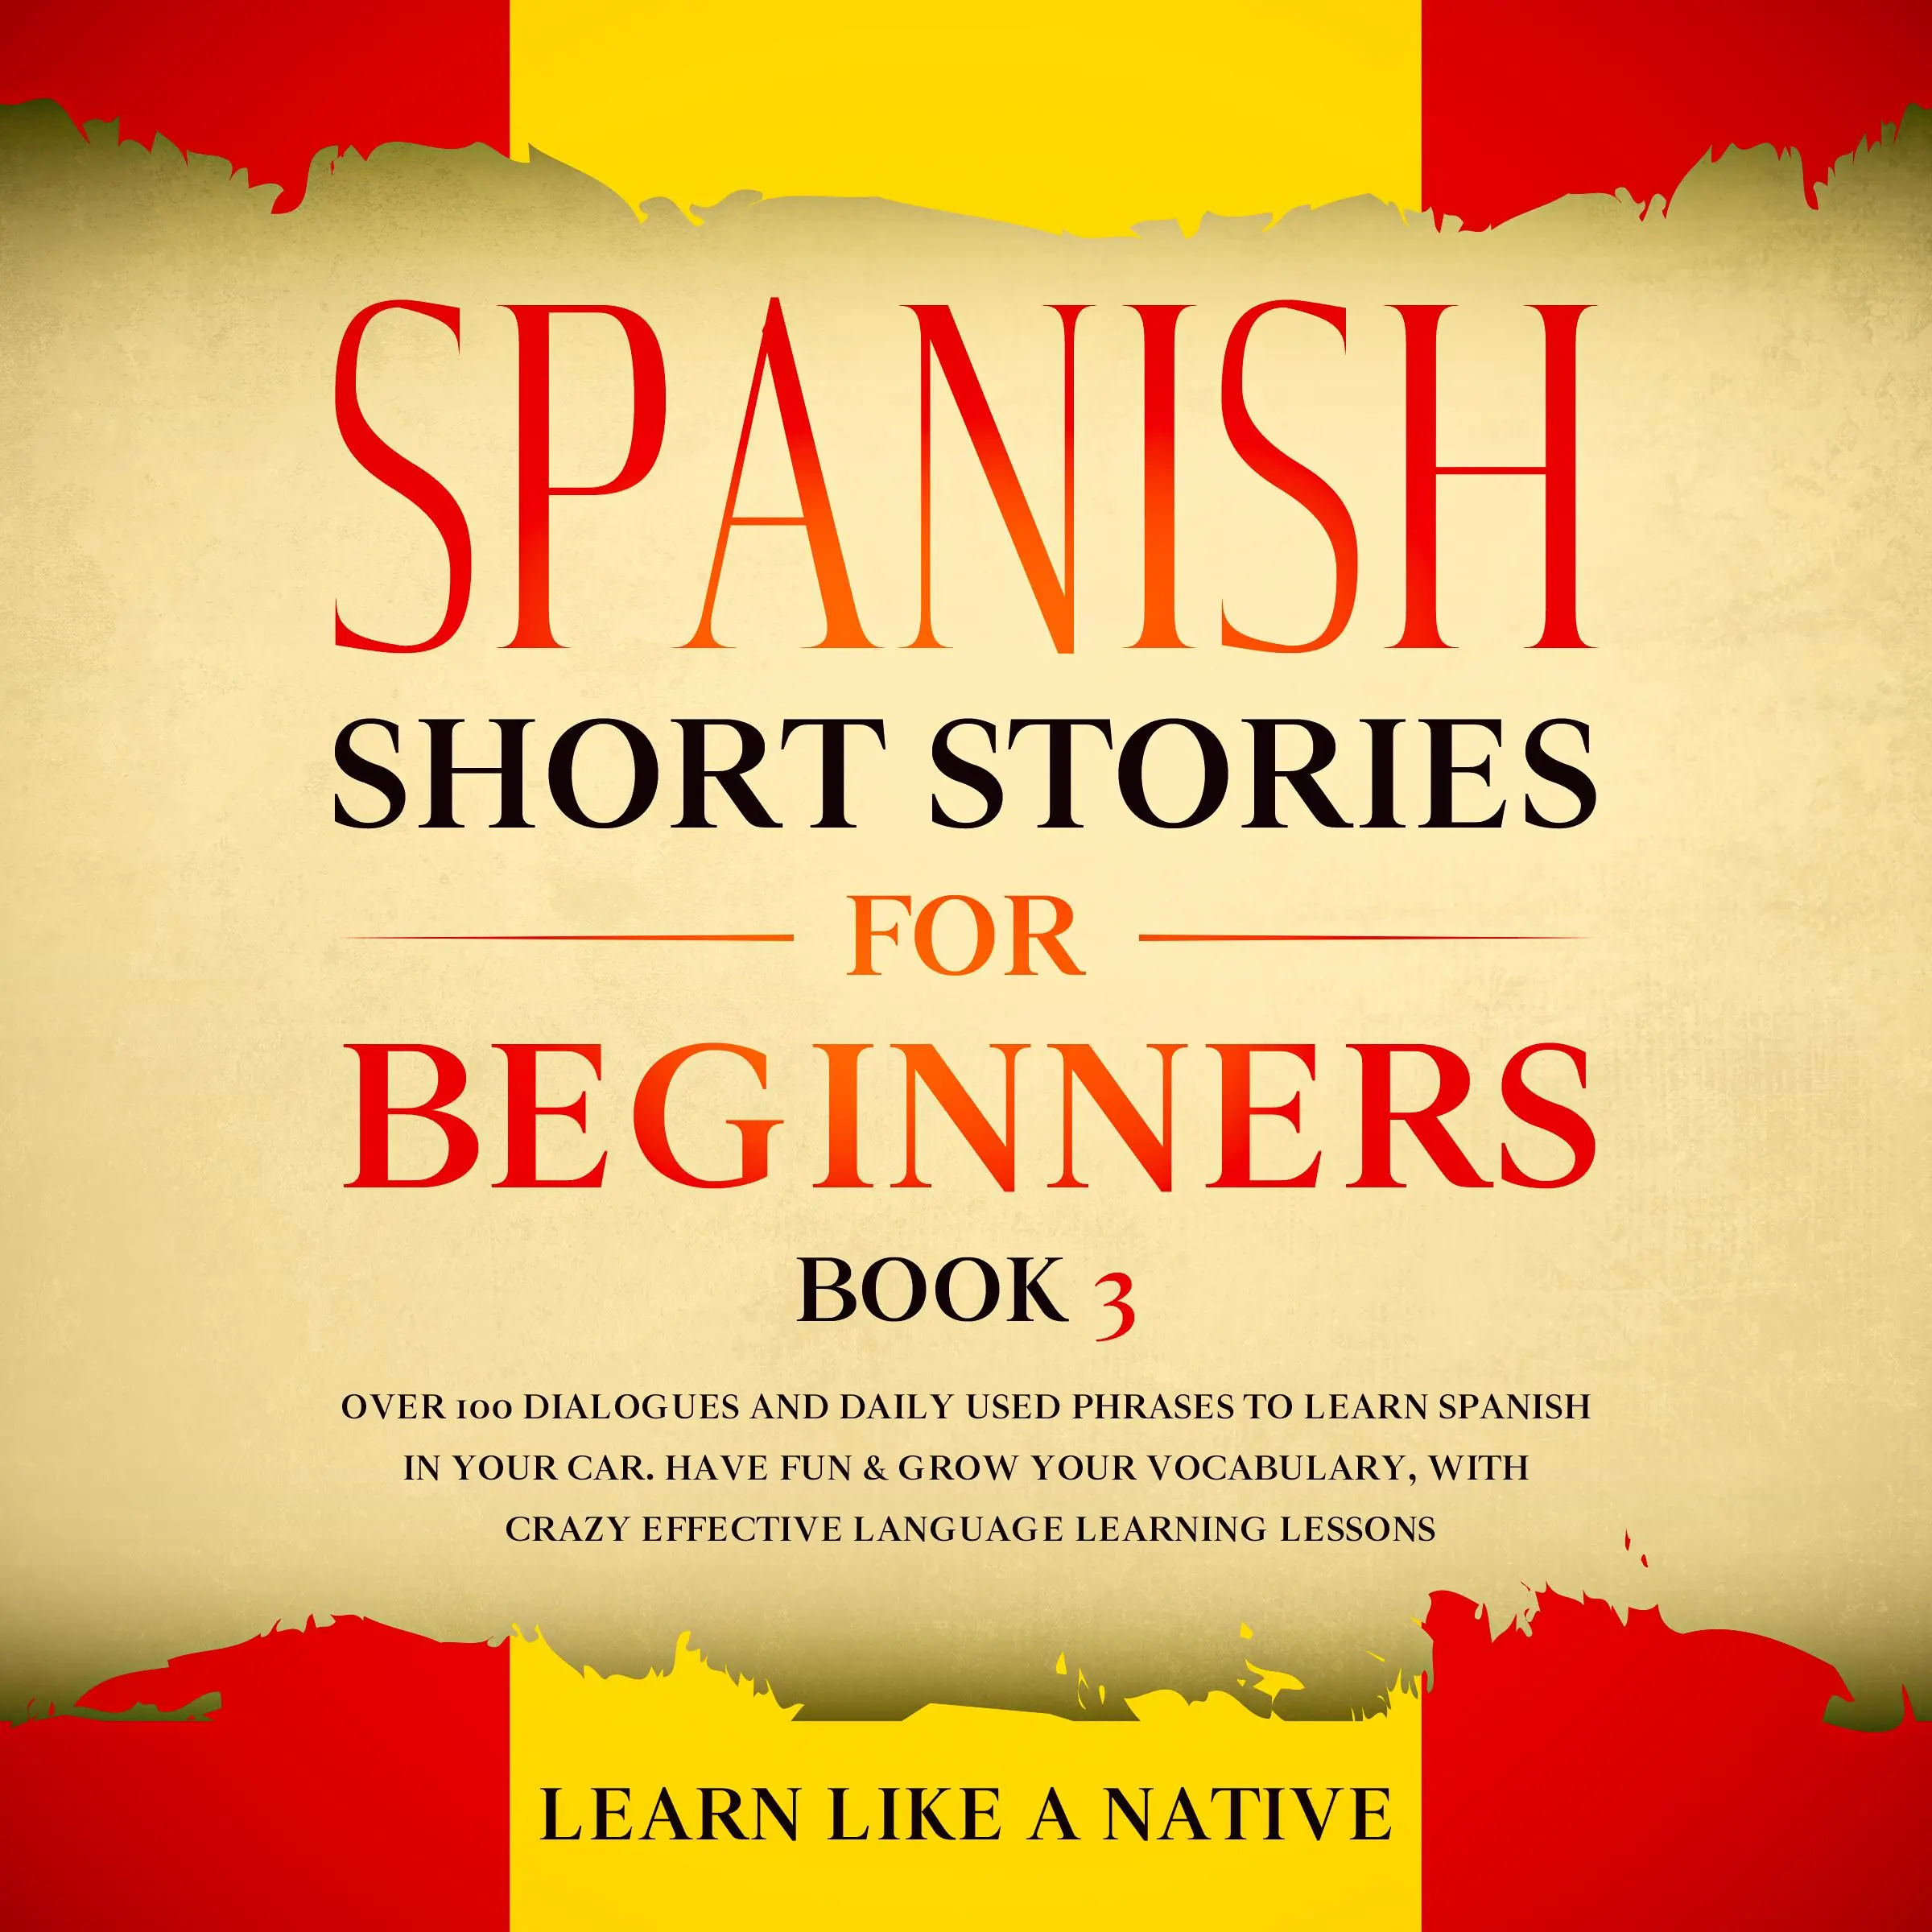 Spanish Short Stories for Beginners Book 3: Over 100 Dialogues and Daily Used Phrases to Learn Spanish in Your Car. Have Fun & Grow Your Vocabulary, with Crazy Effective Language Learning Lessons by Learn Like A Native Audiobook